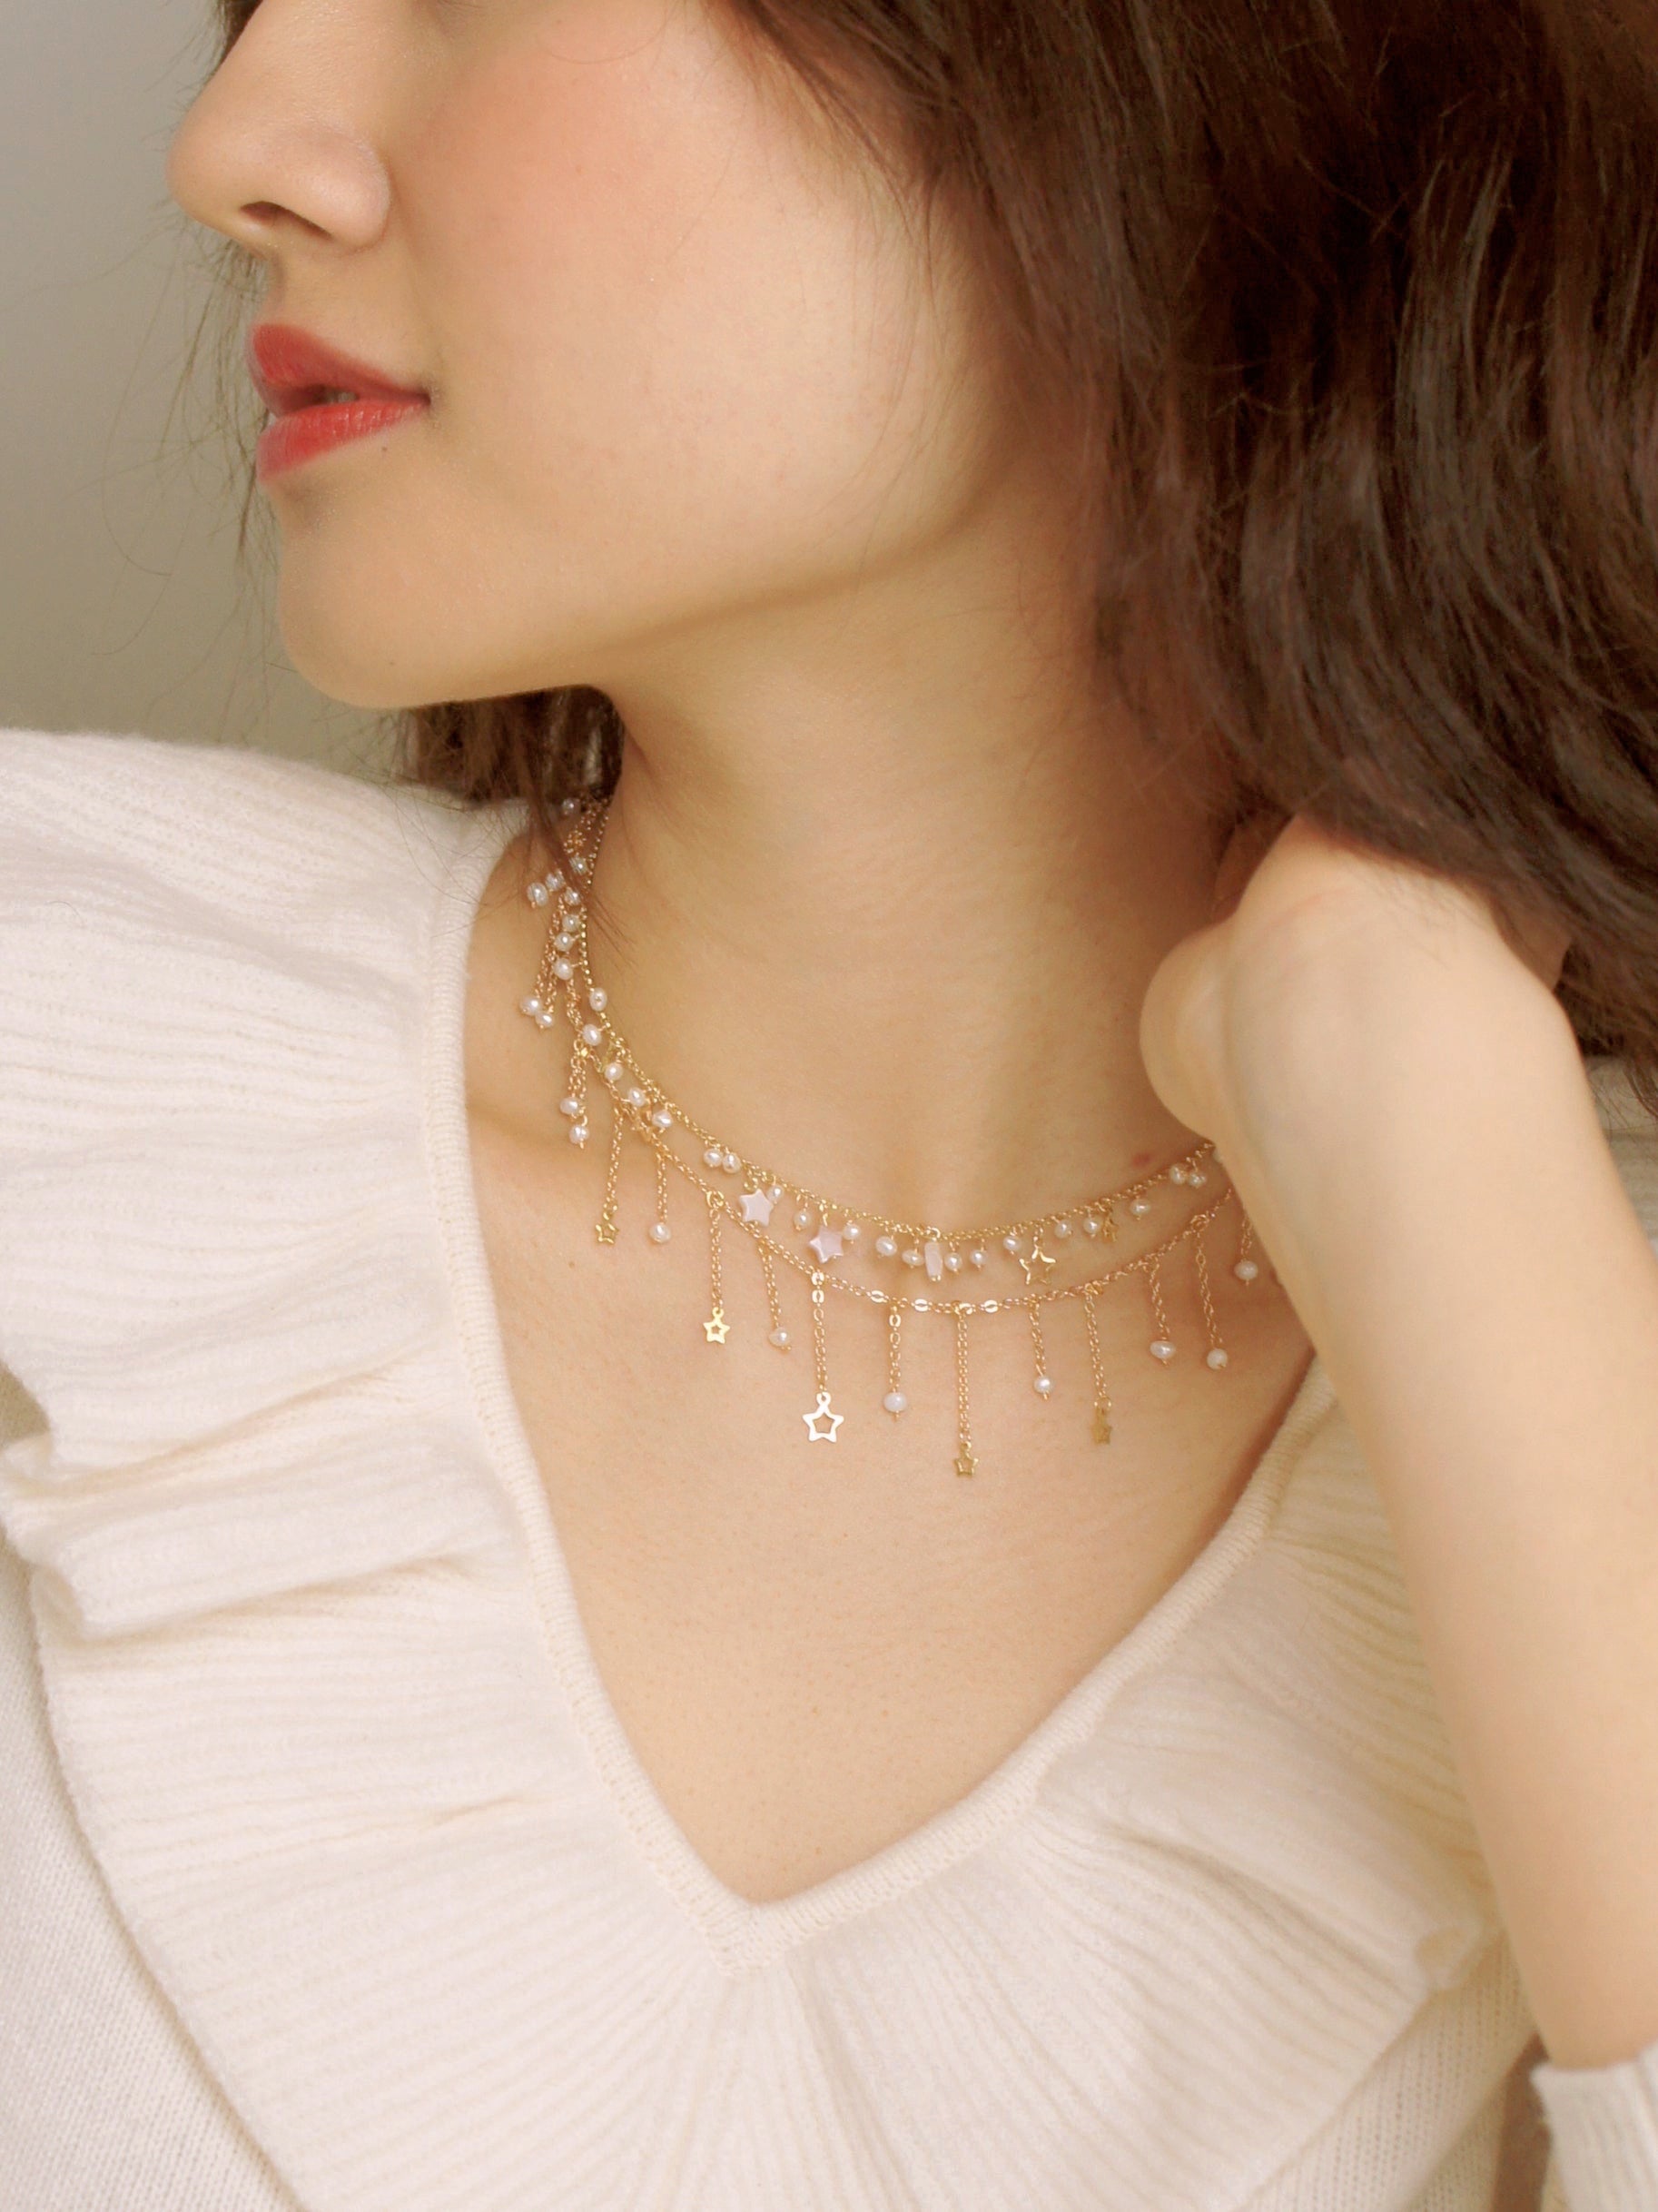 Starlight Chain Choker Necklace with Freshwater Pearl and Mother of Pearl Stars